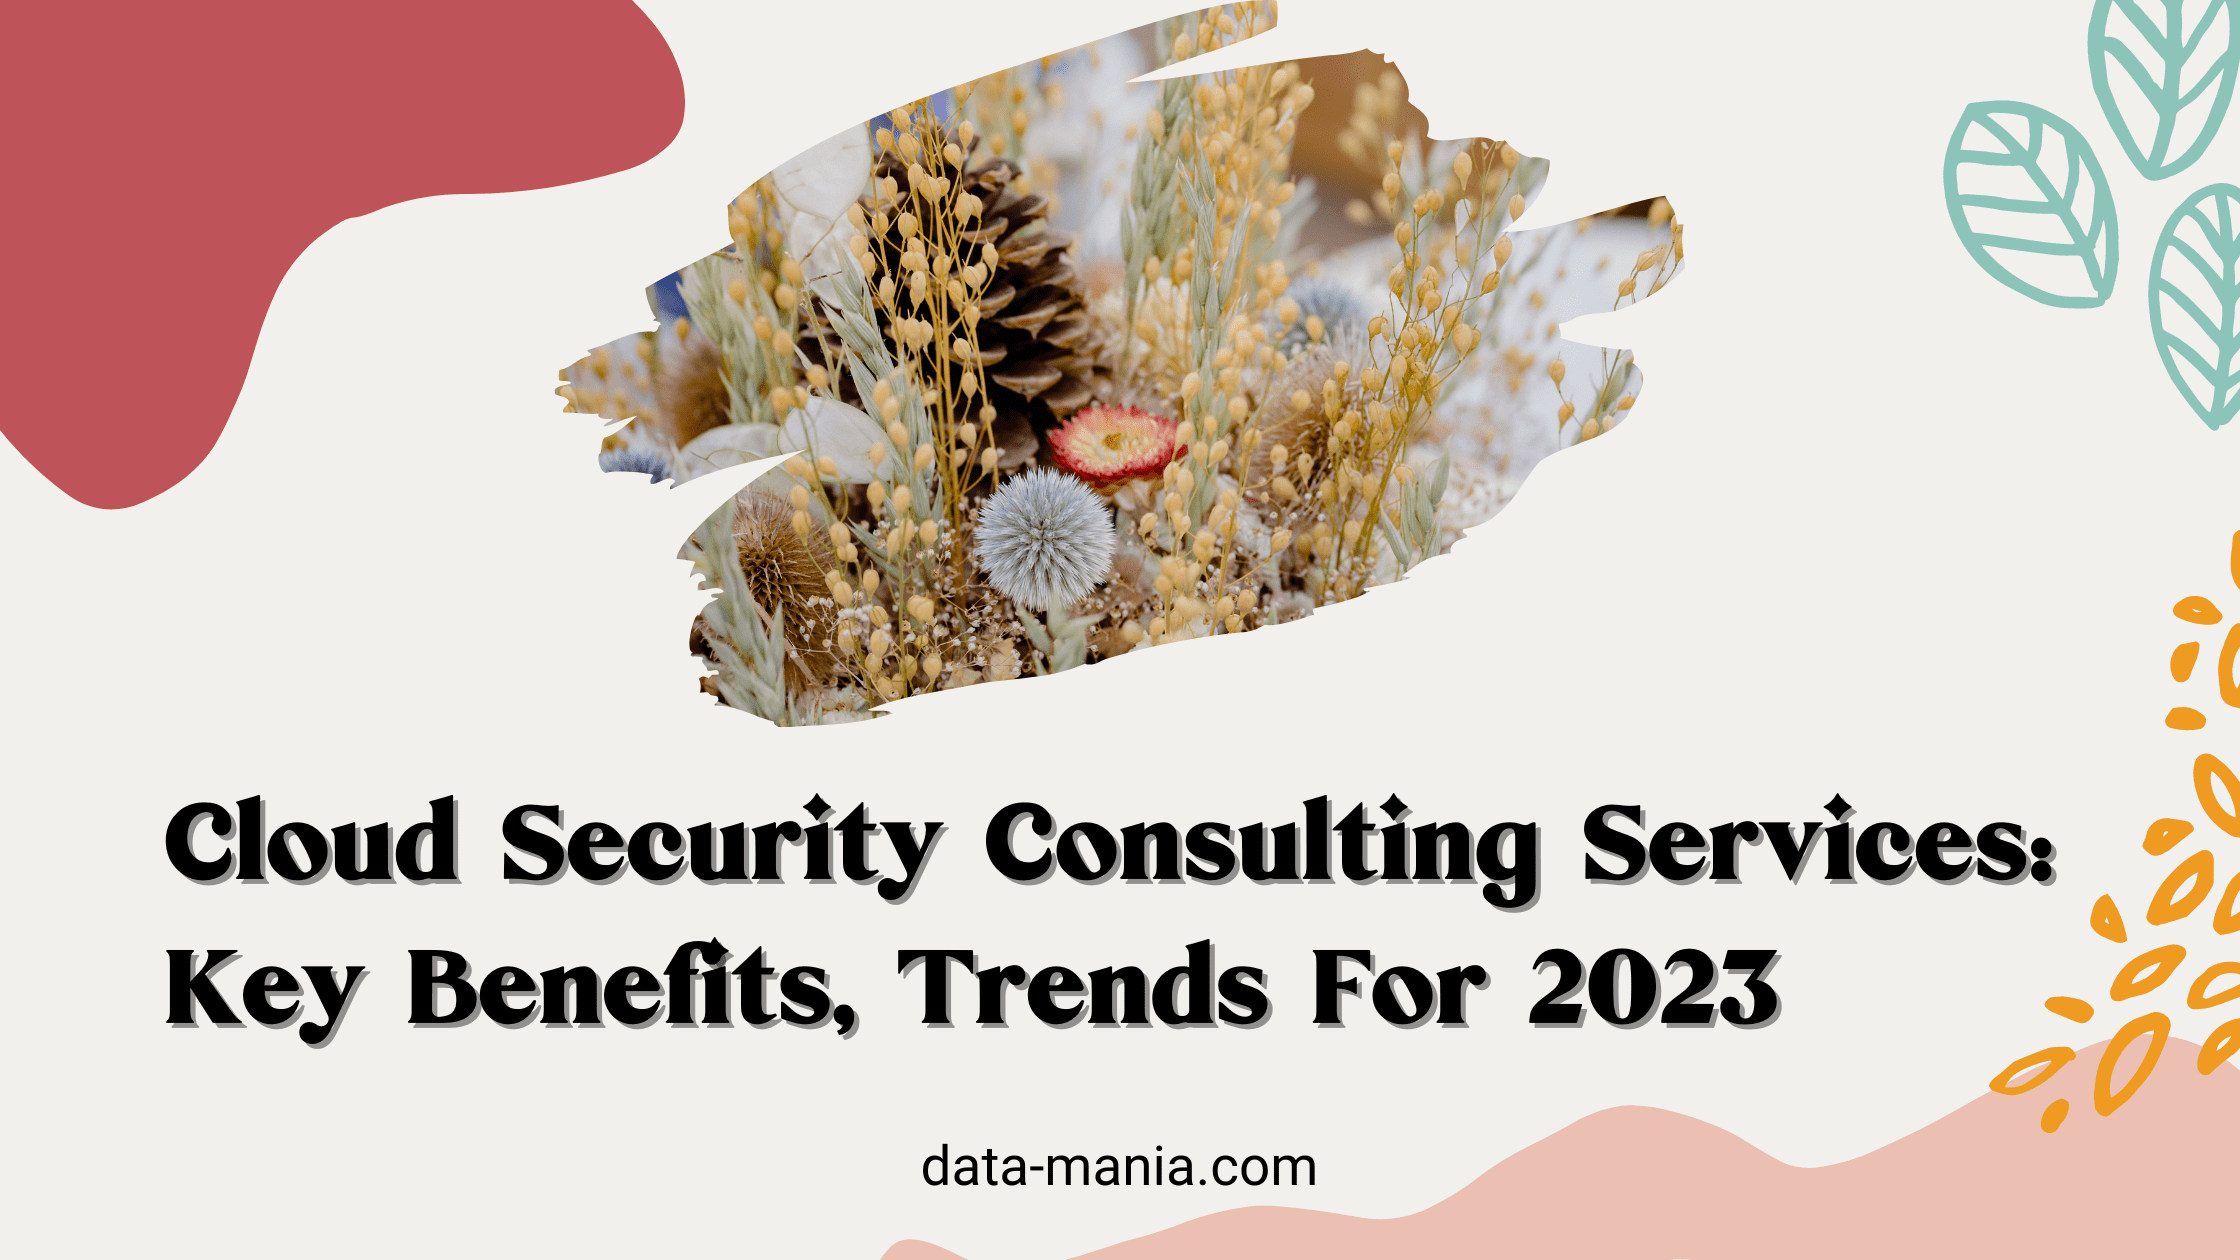 learn important 2023 trends in cloud security consulting services